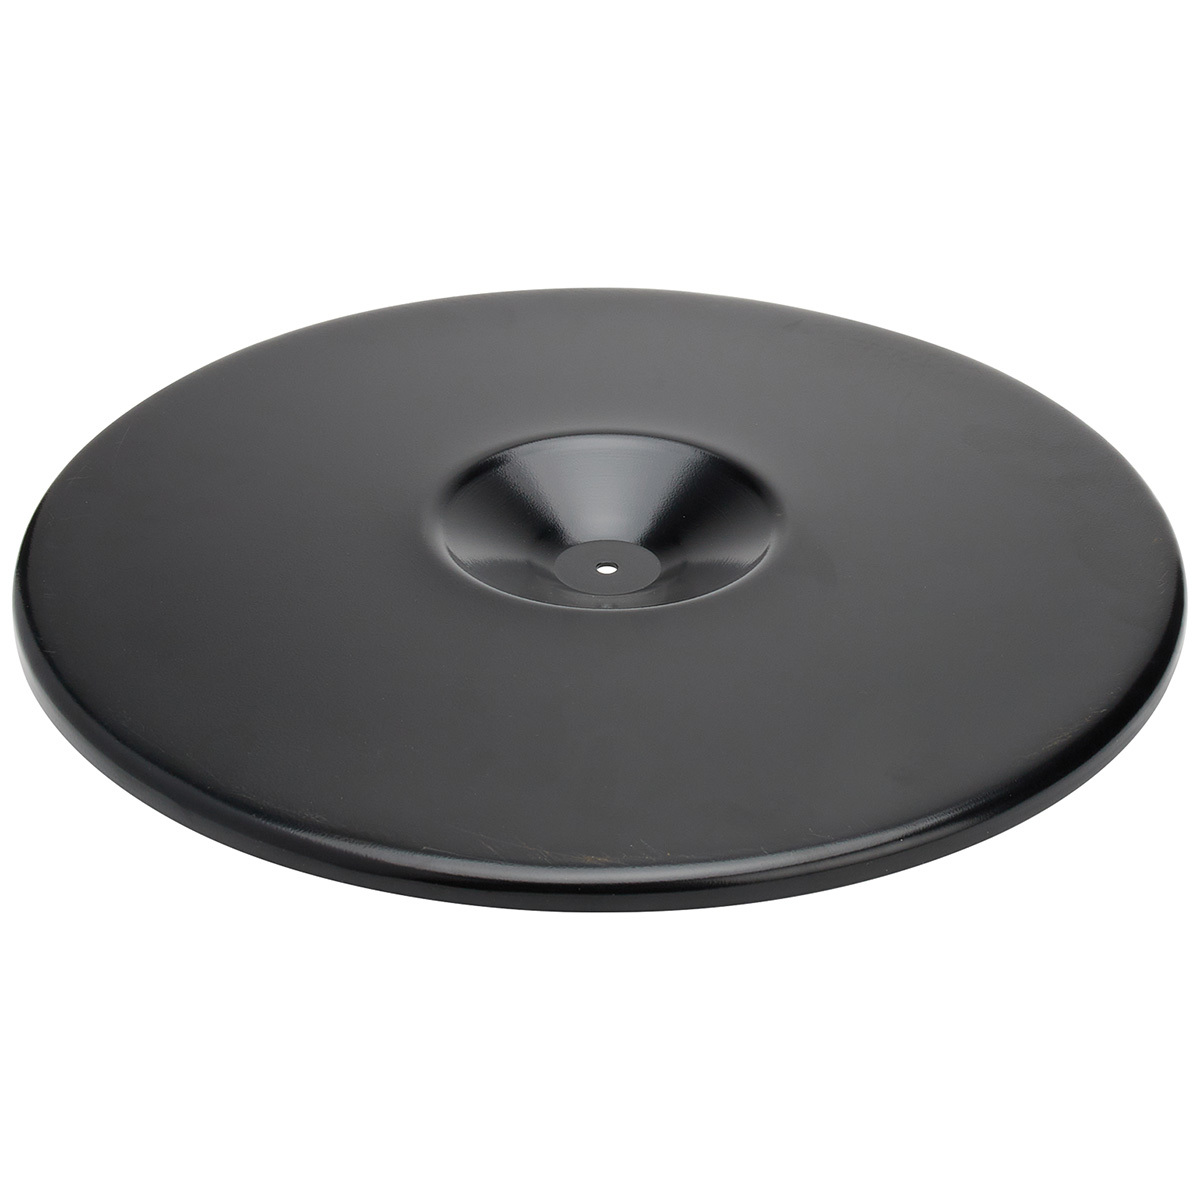 Allstar Performance 25956 Air Cleaner Lid, Lightweight, 14 in Round, Aluminum, Black Anodized, Each